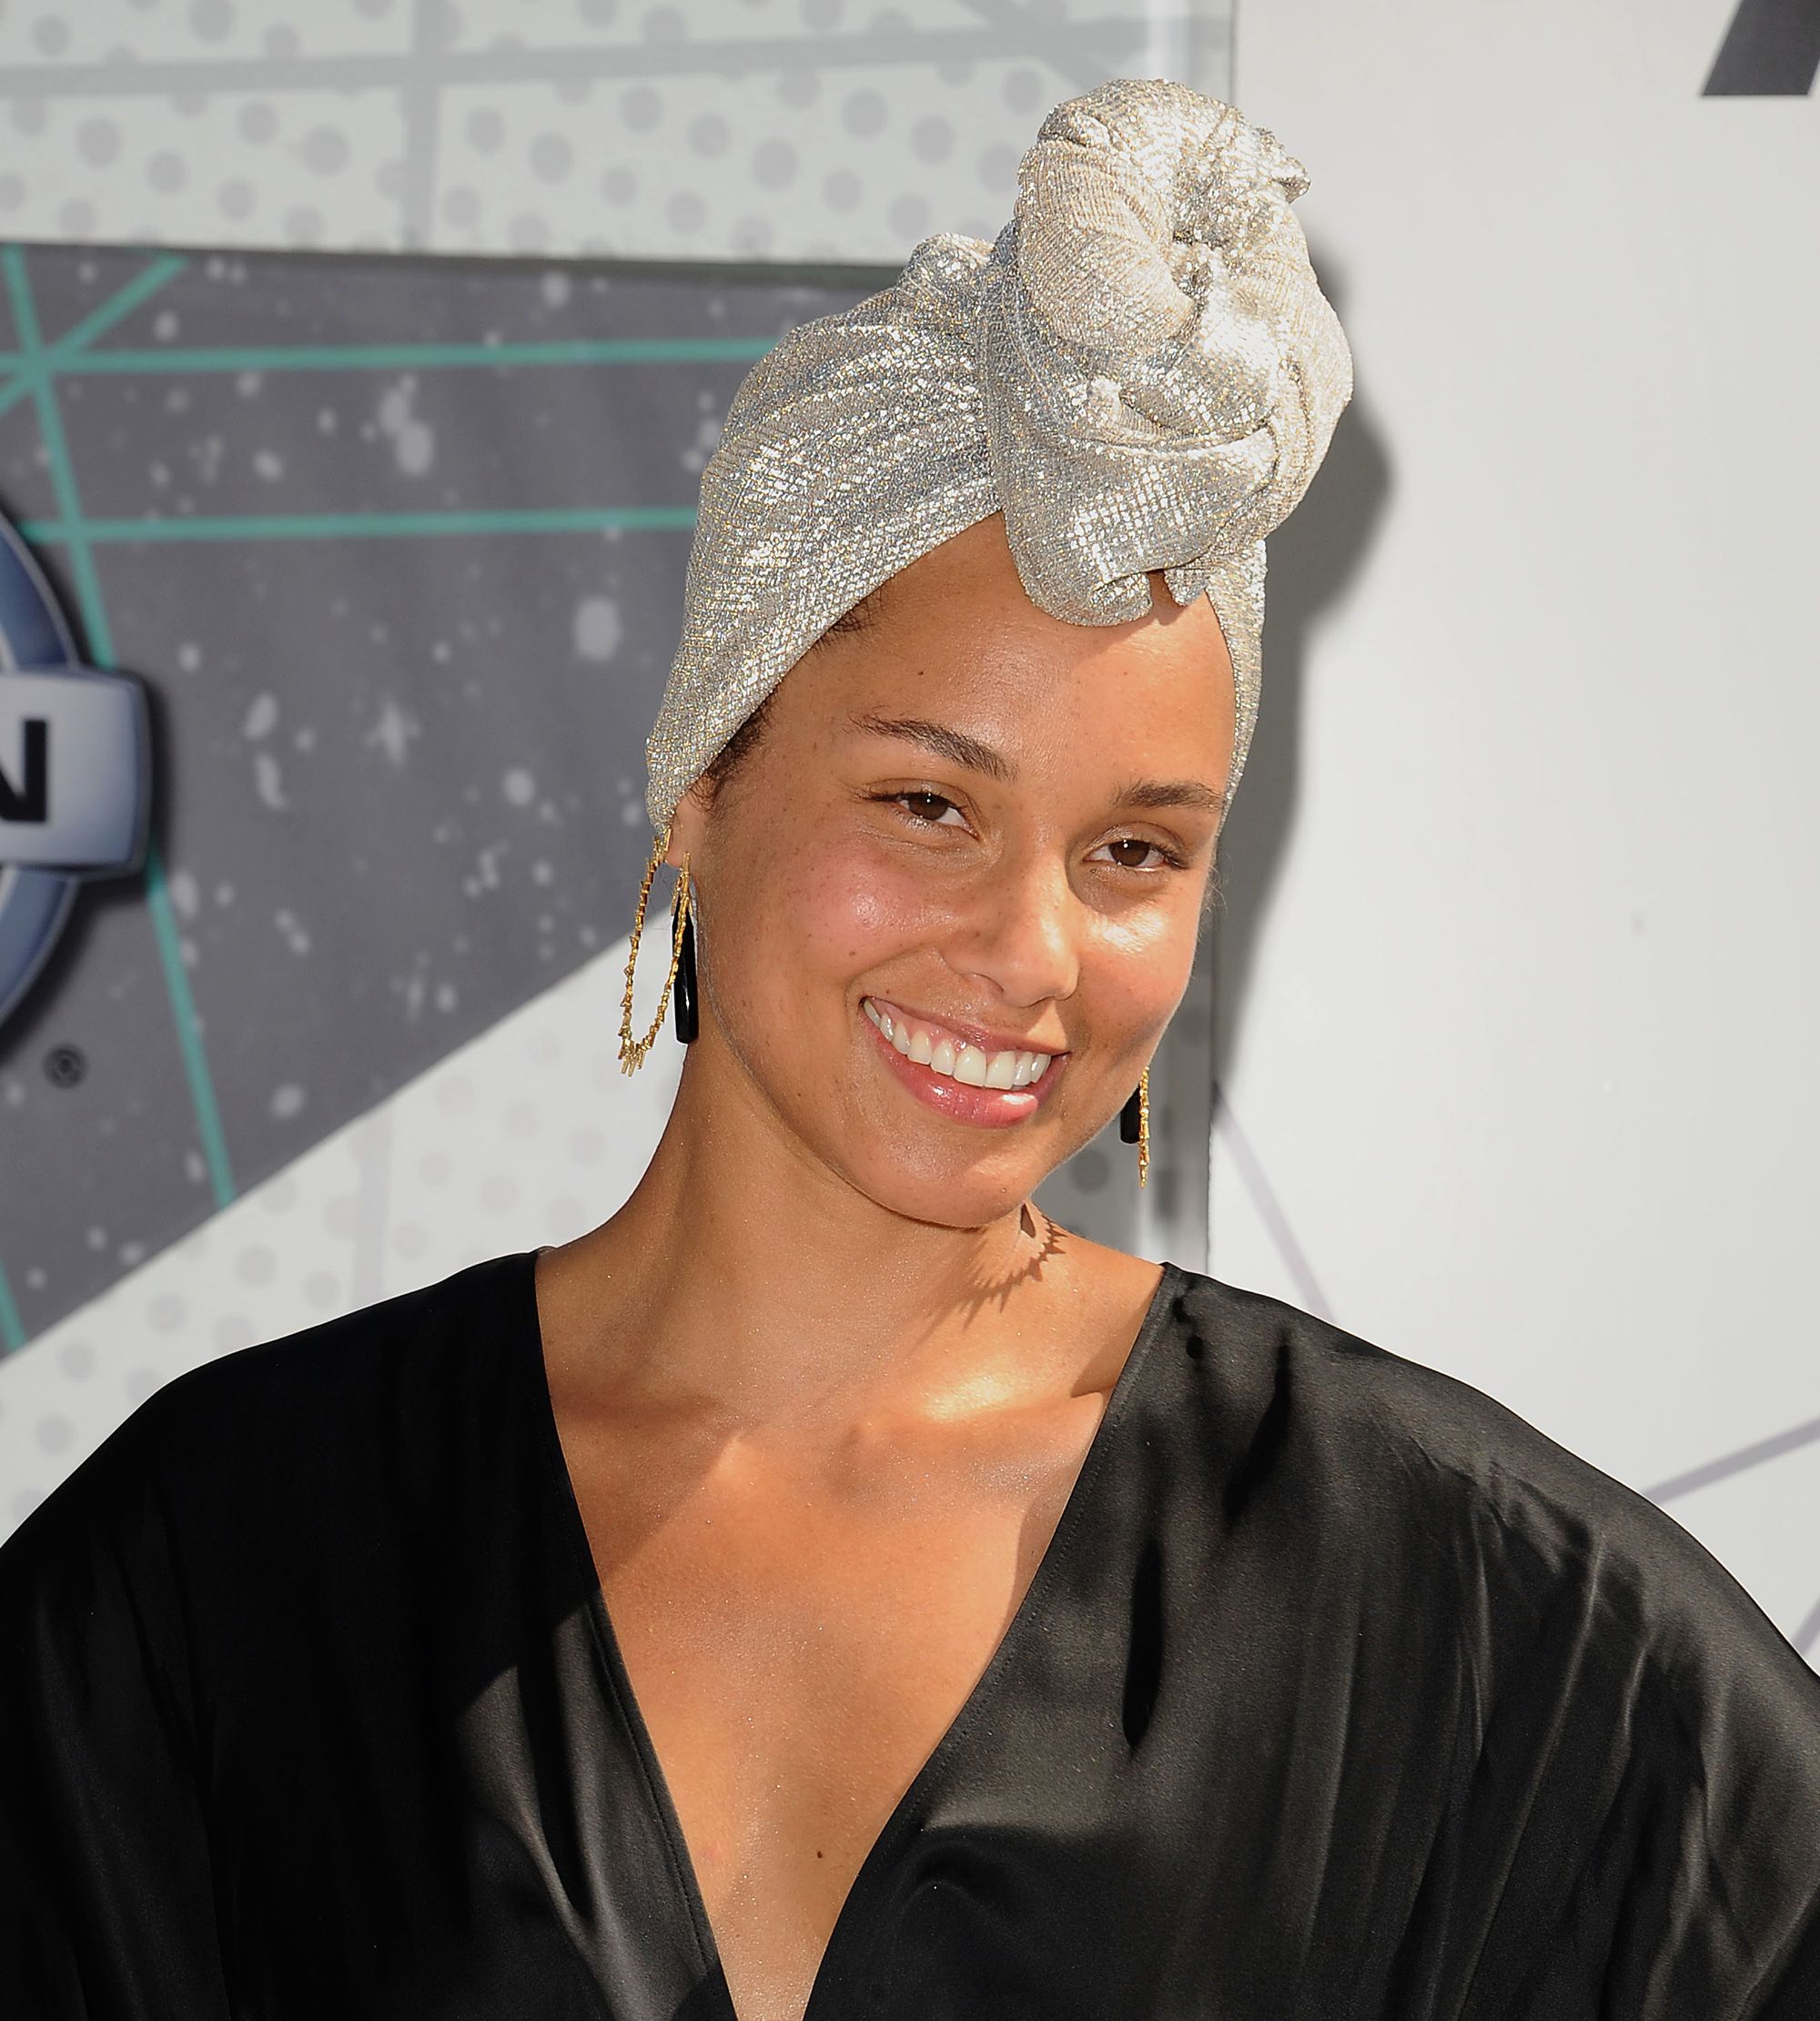 So It Turns Out Alicia Keys Actually *Does* Use Products Her No-Makeup